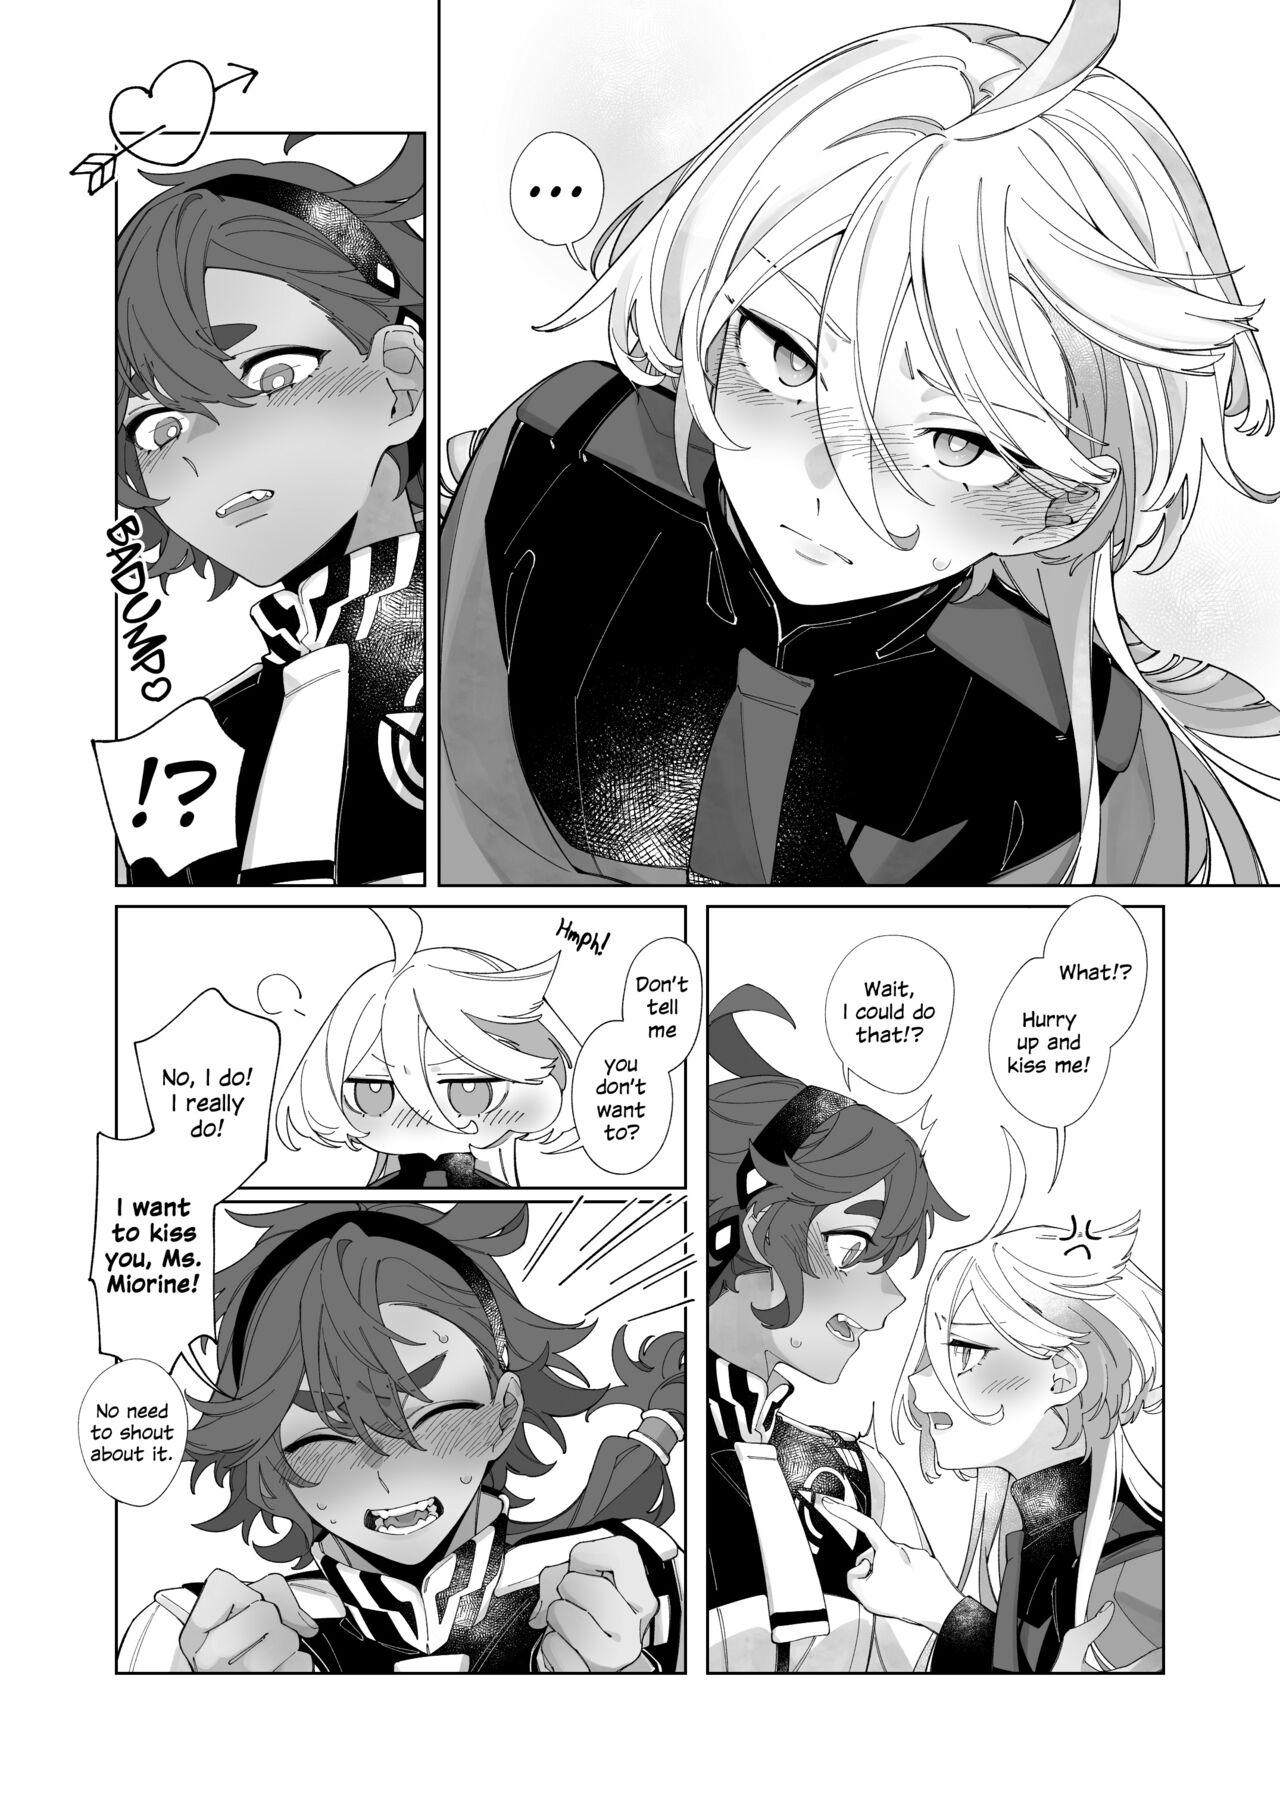 Hardcore Gay Kiss no Ato Nani ga Shitai? | After Kissing, What Else Do You Want to Do? - Mobile suit gundam the witch from mercury HD - Page 5